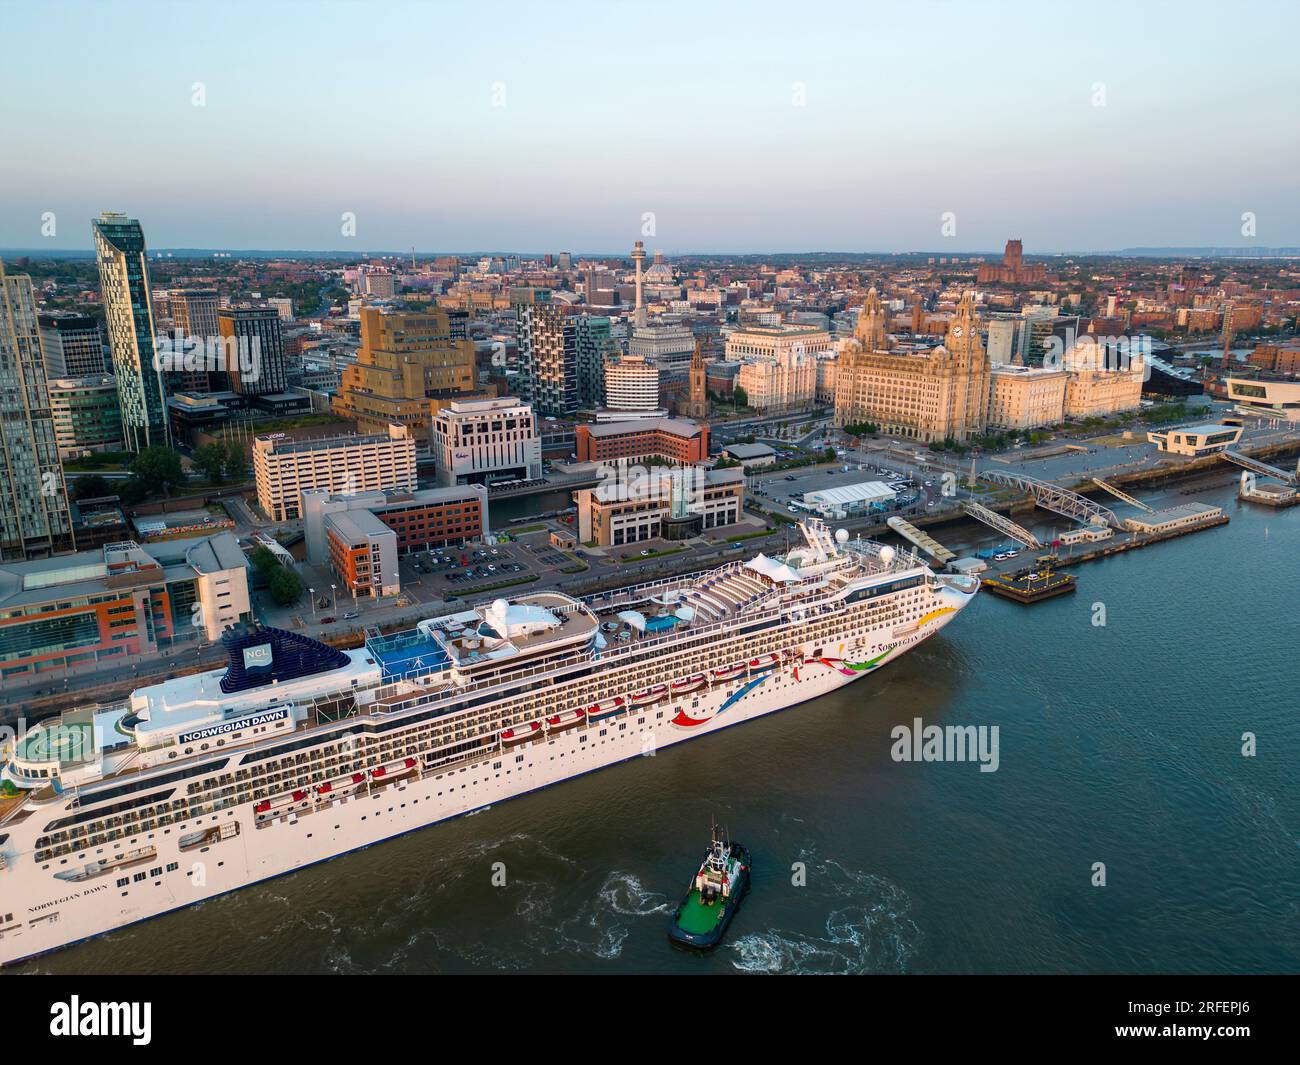 Norwegian Dawn cruise ship moored at the Pier Head, Liverpool, England Stock Photo